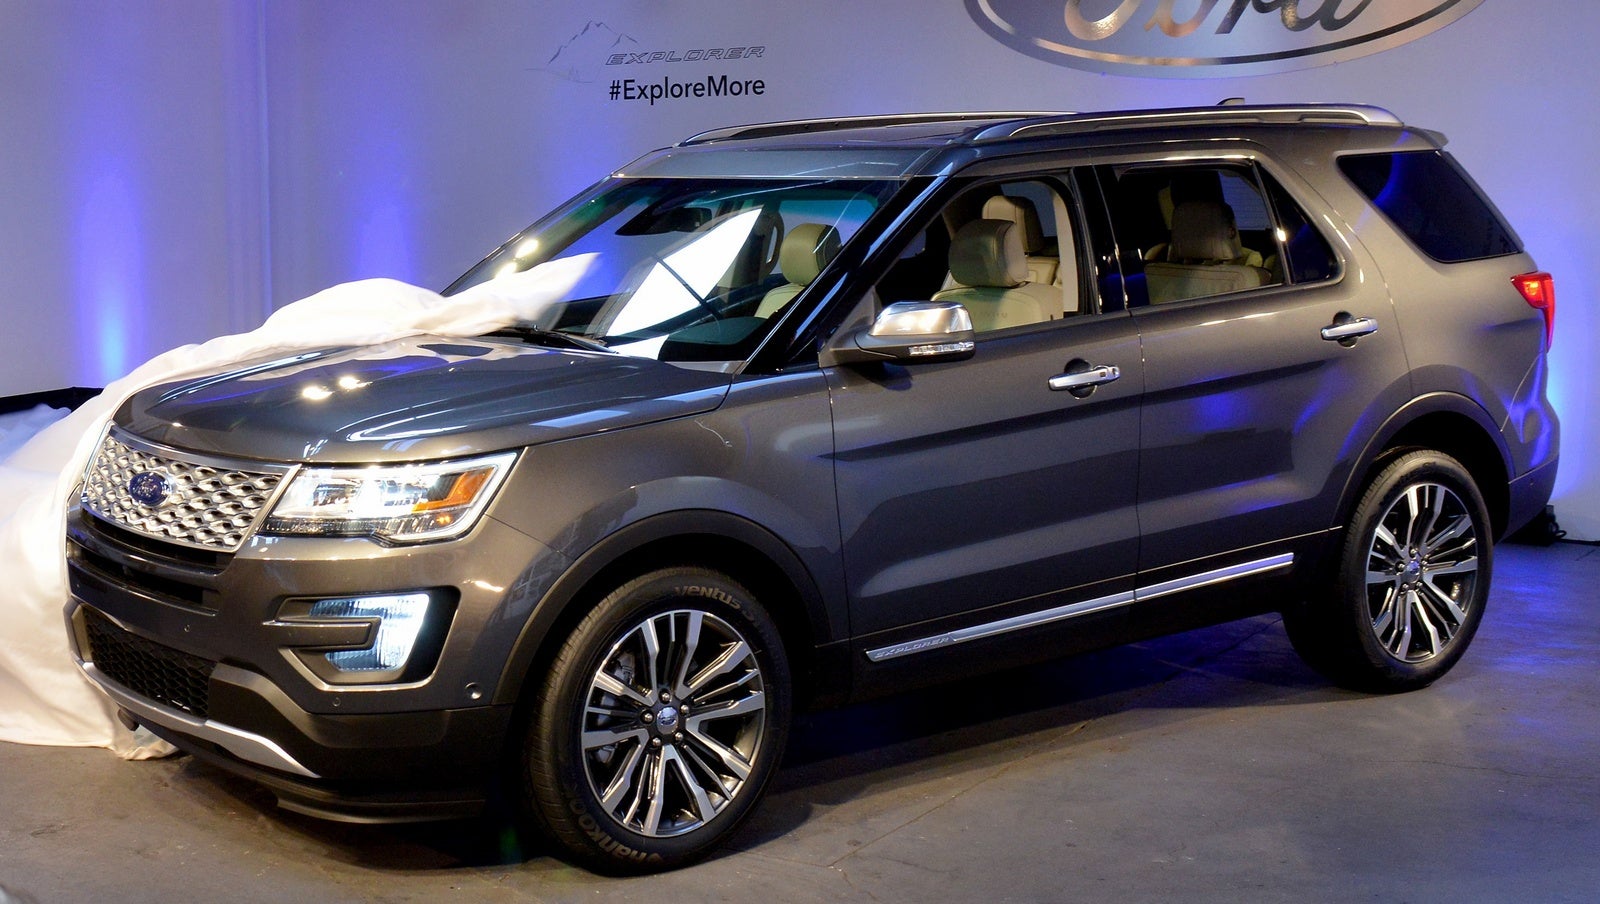 New 2014 \/ 2015 \/ 2016 Ford Explorer For Sale Minneapolis 